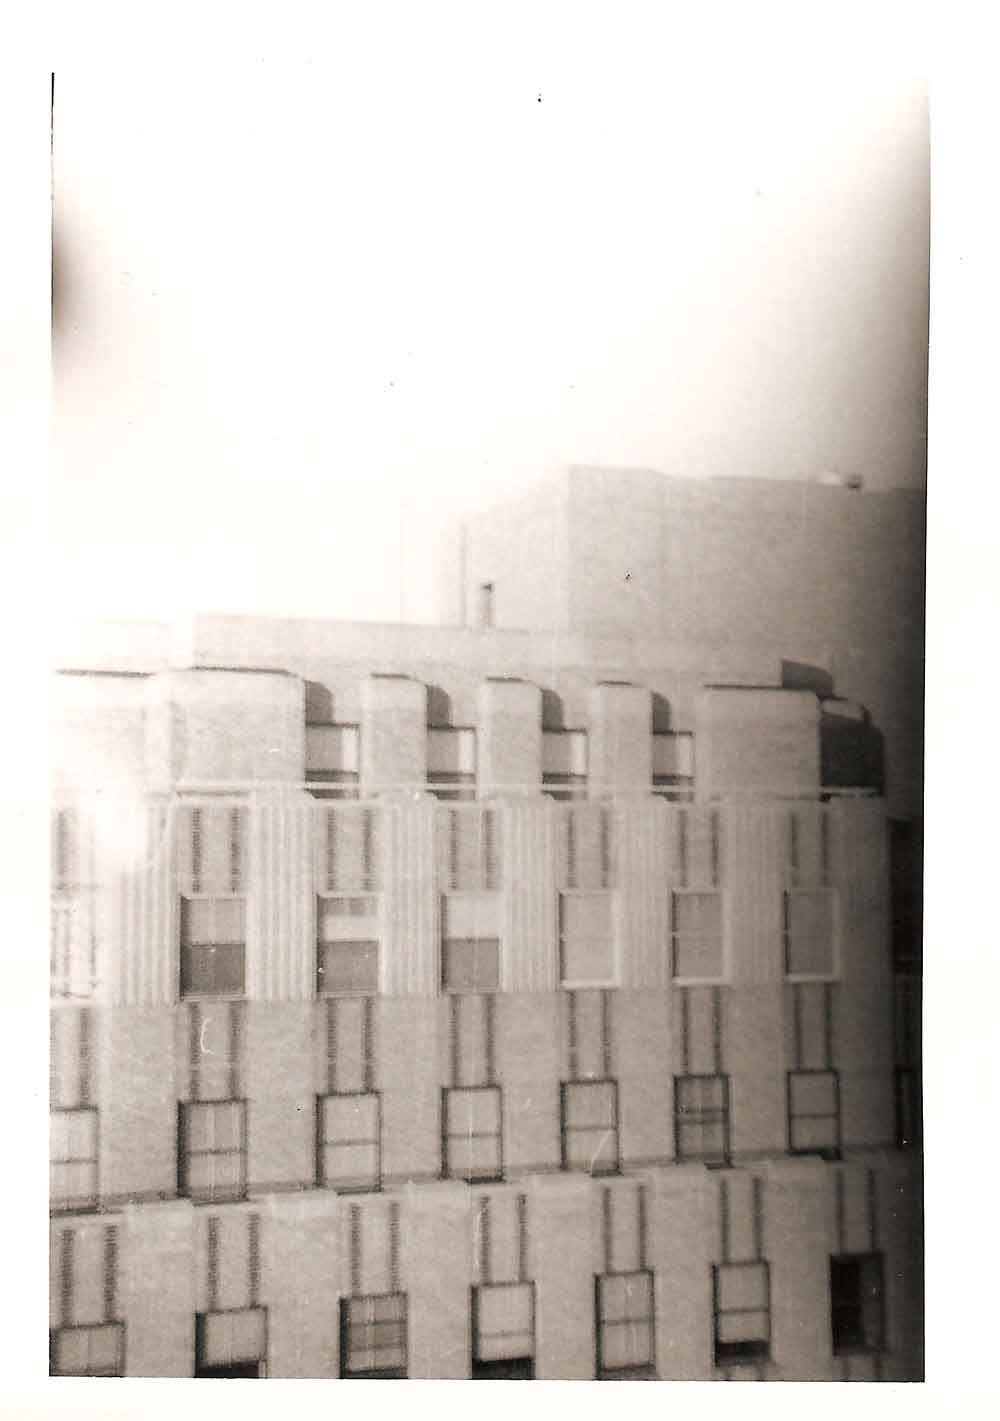 (HTC.2010.6.04) - Detail of South Side of Ramsey Tower from First National Bank Building, c. 1937